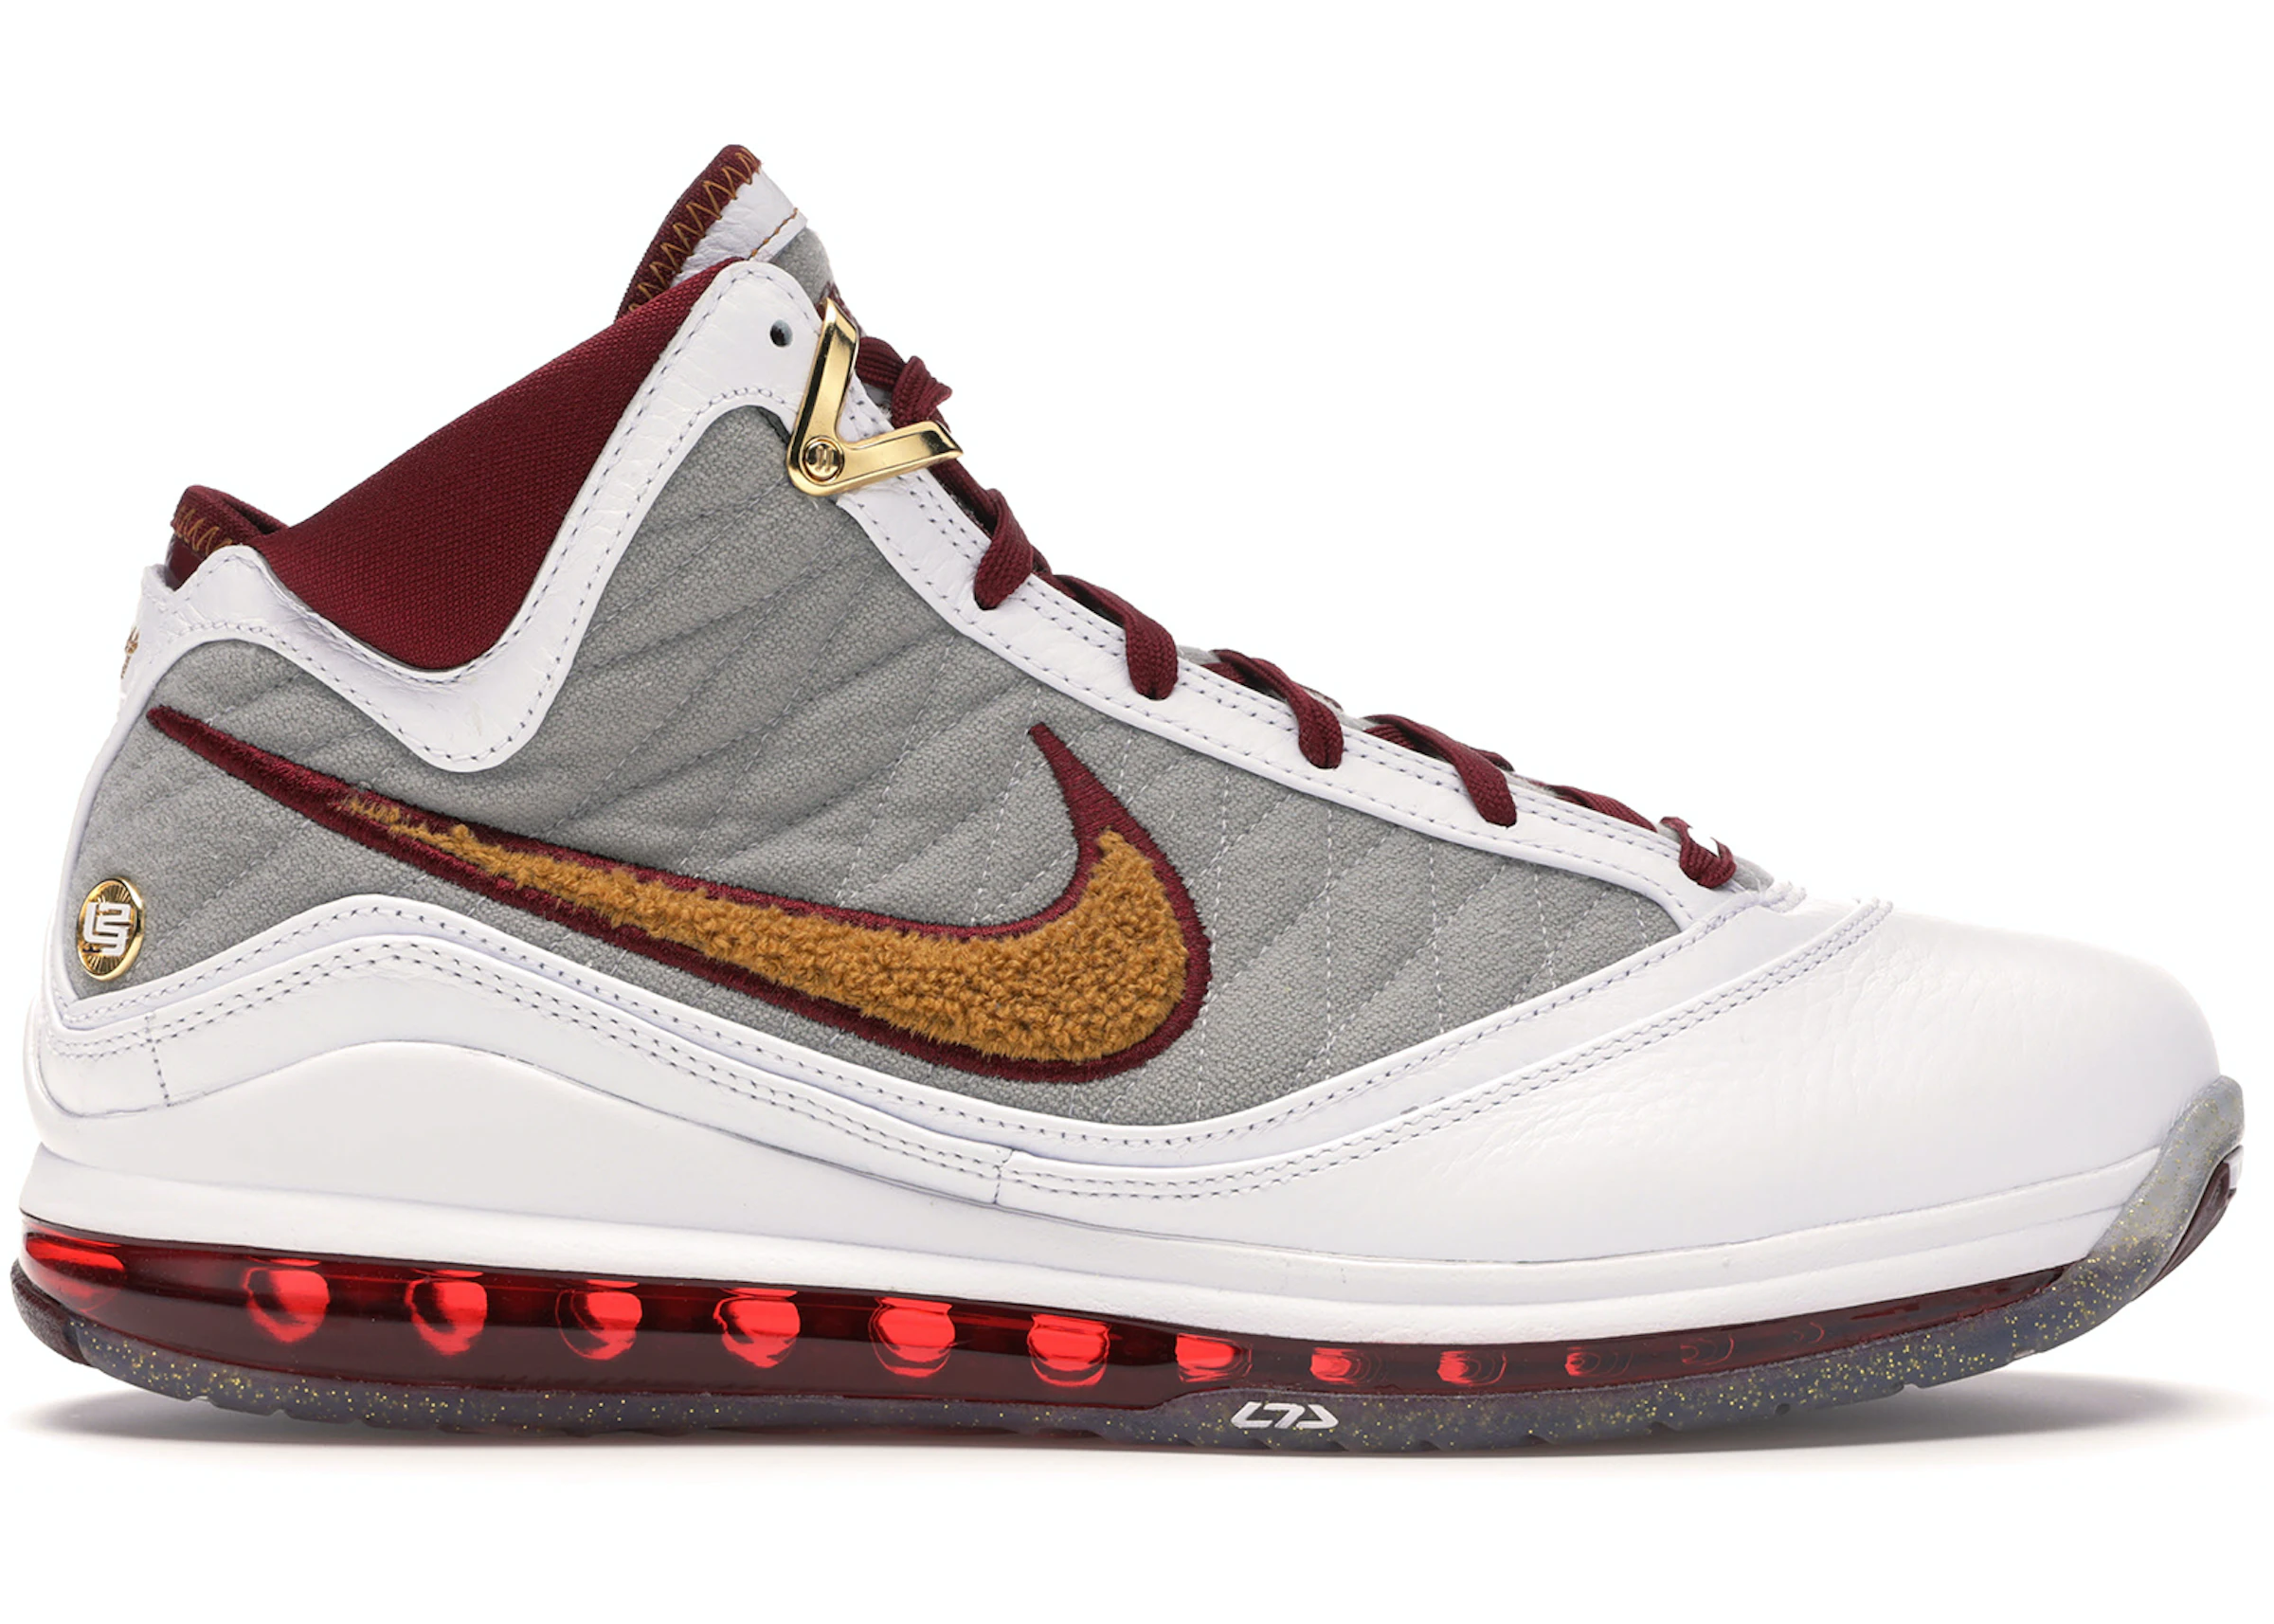 Buy Nike lebron air max LeBron 7 Shoes & New Sneakers - StockX